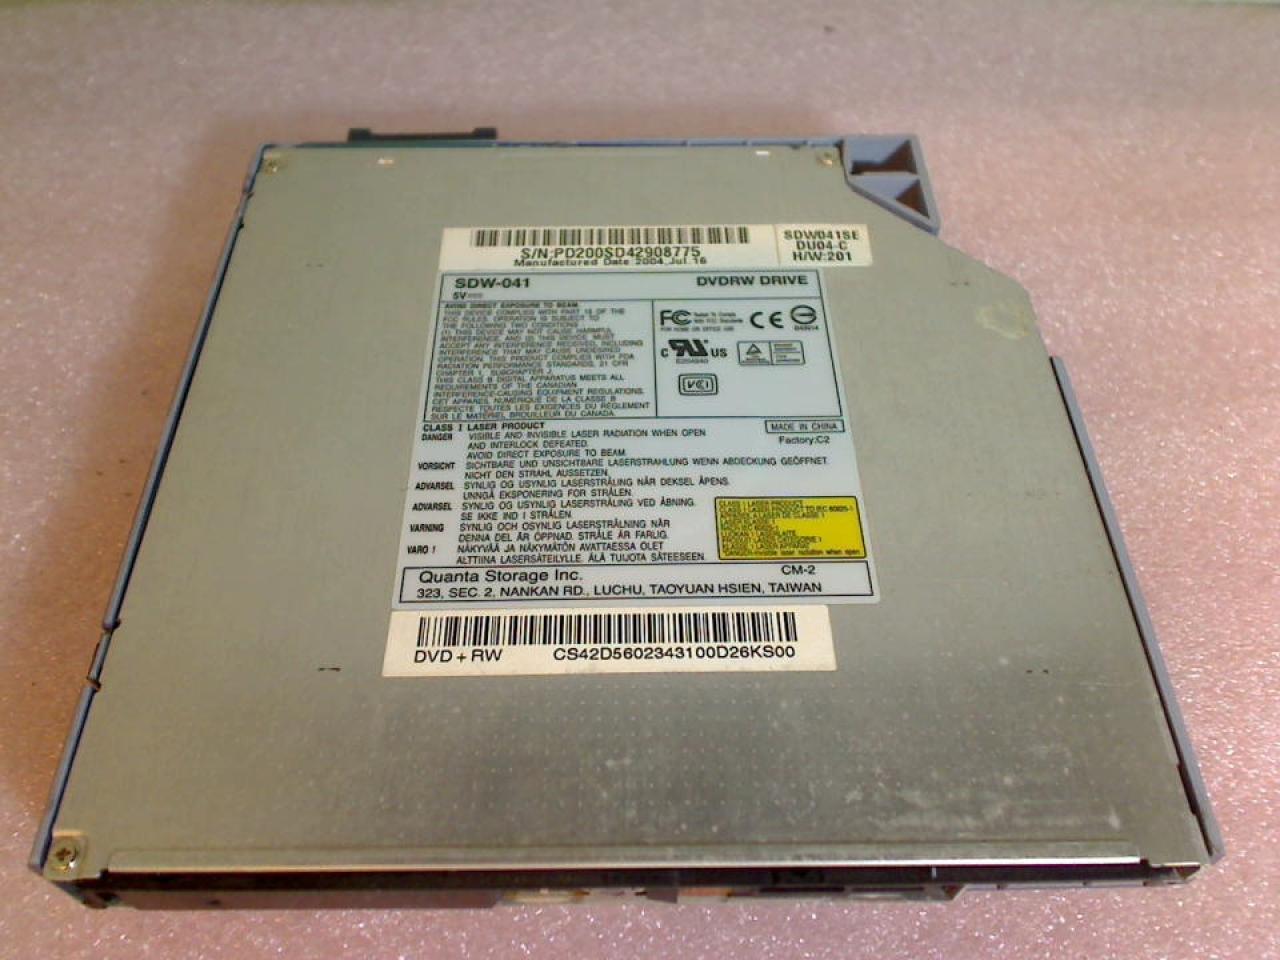 DVD burner without cover SDW-041 DVDRW Drive Sony PCG-8N2M PCG-GRT815E